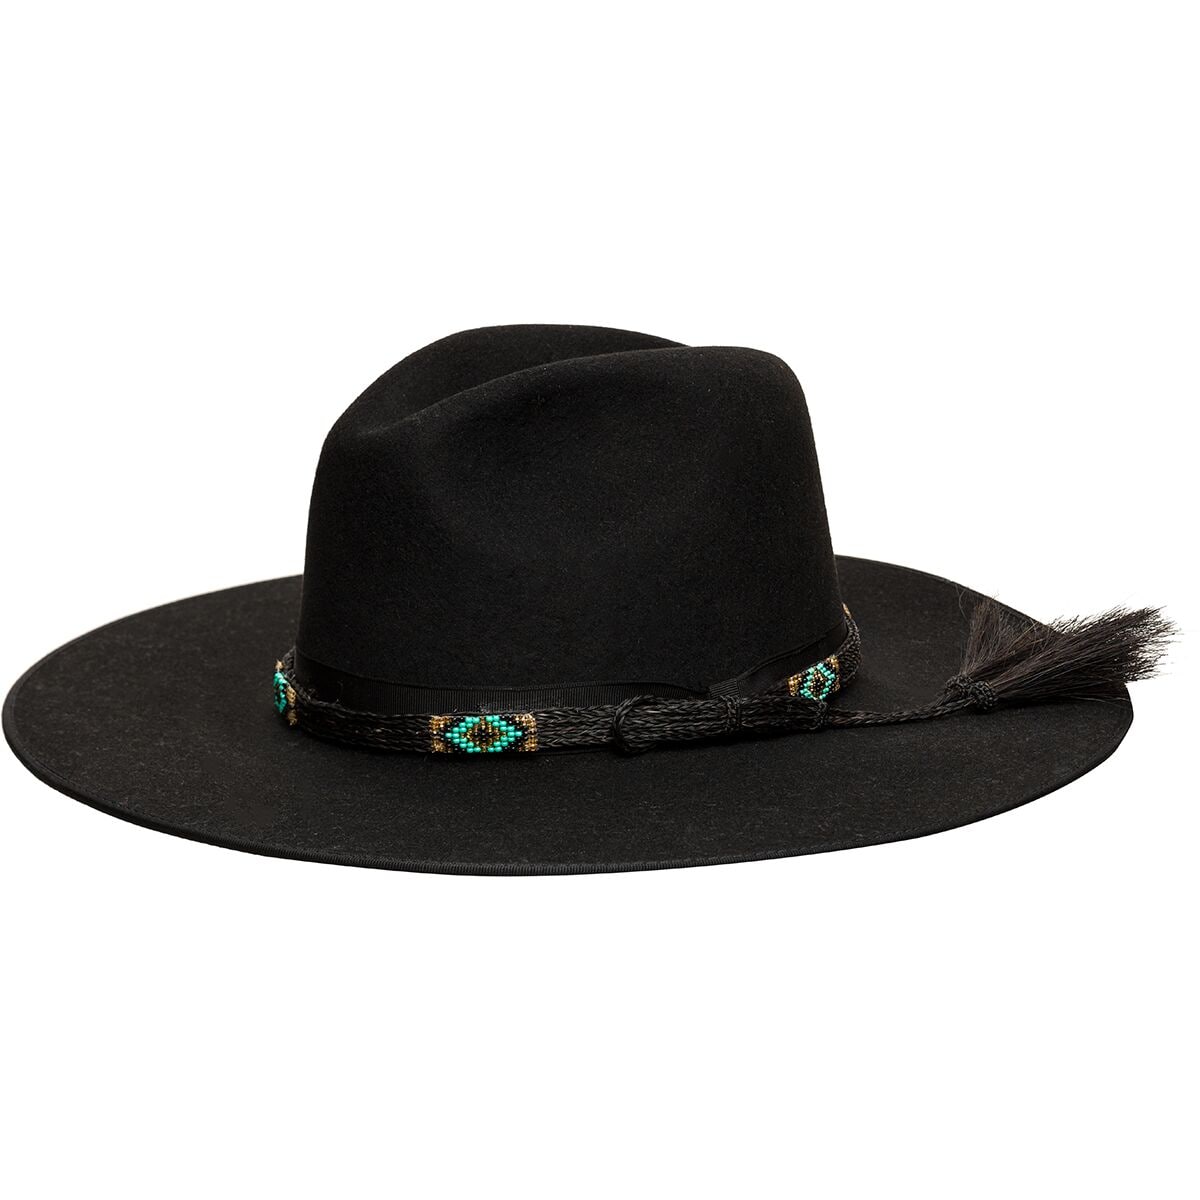 Stetson Helix Hat - Accessories | Backcountry